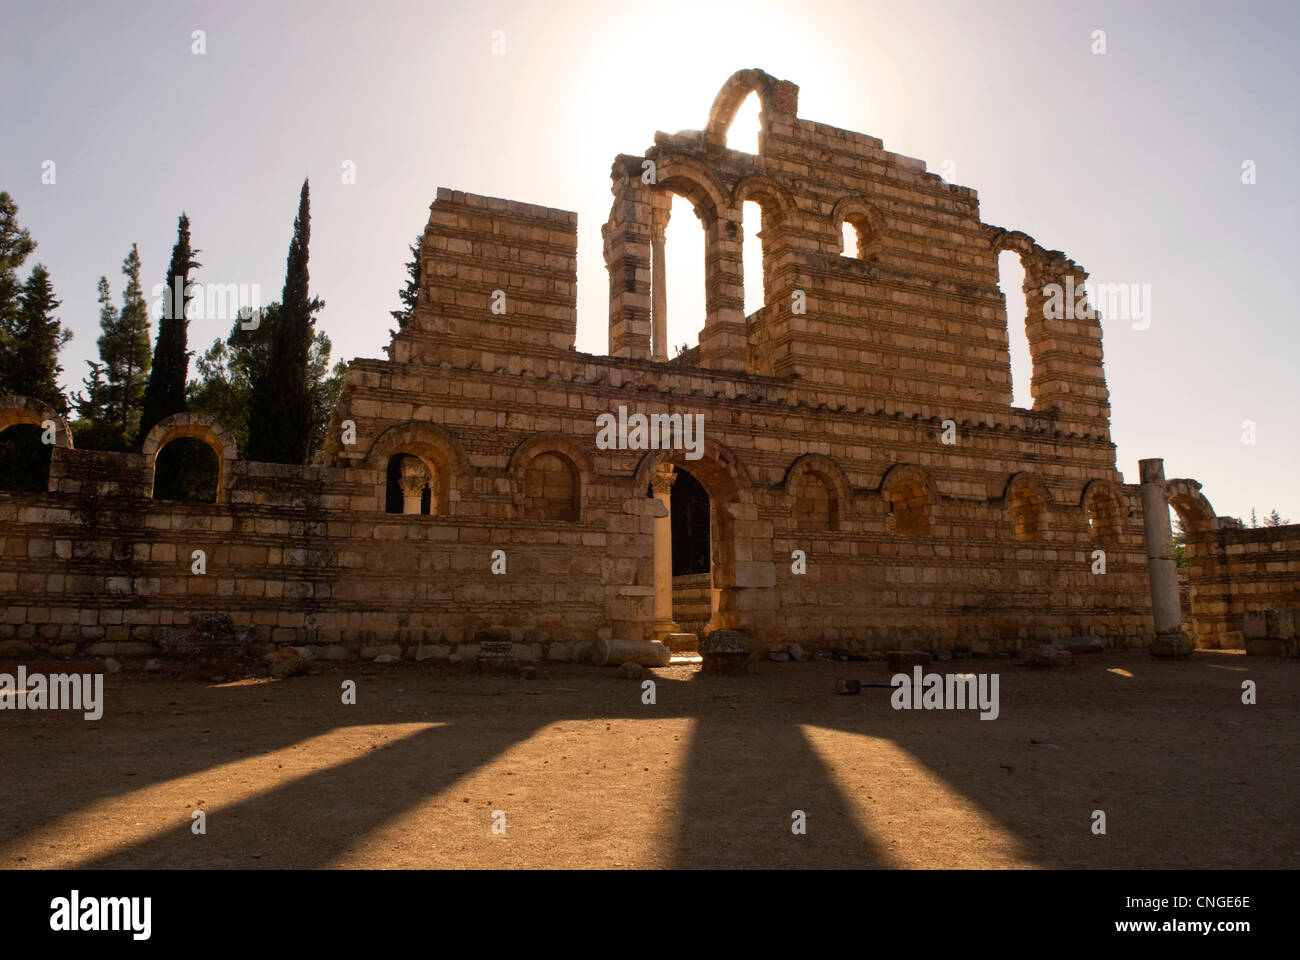 Shadows cast by the late afternoon sun through the Great Palace, Aanjar, Bekaa Valley, Lebanon. Umayyad era archaeological site. Stock Photo